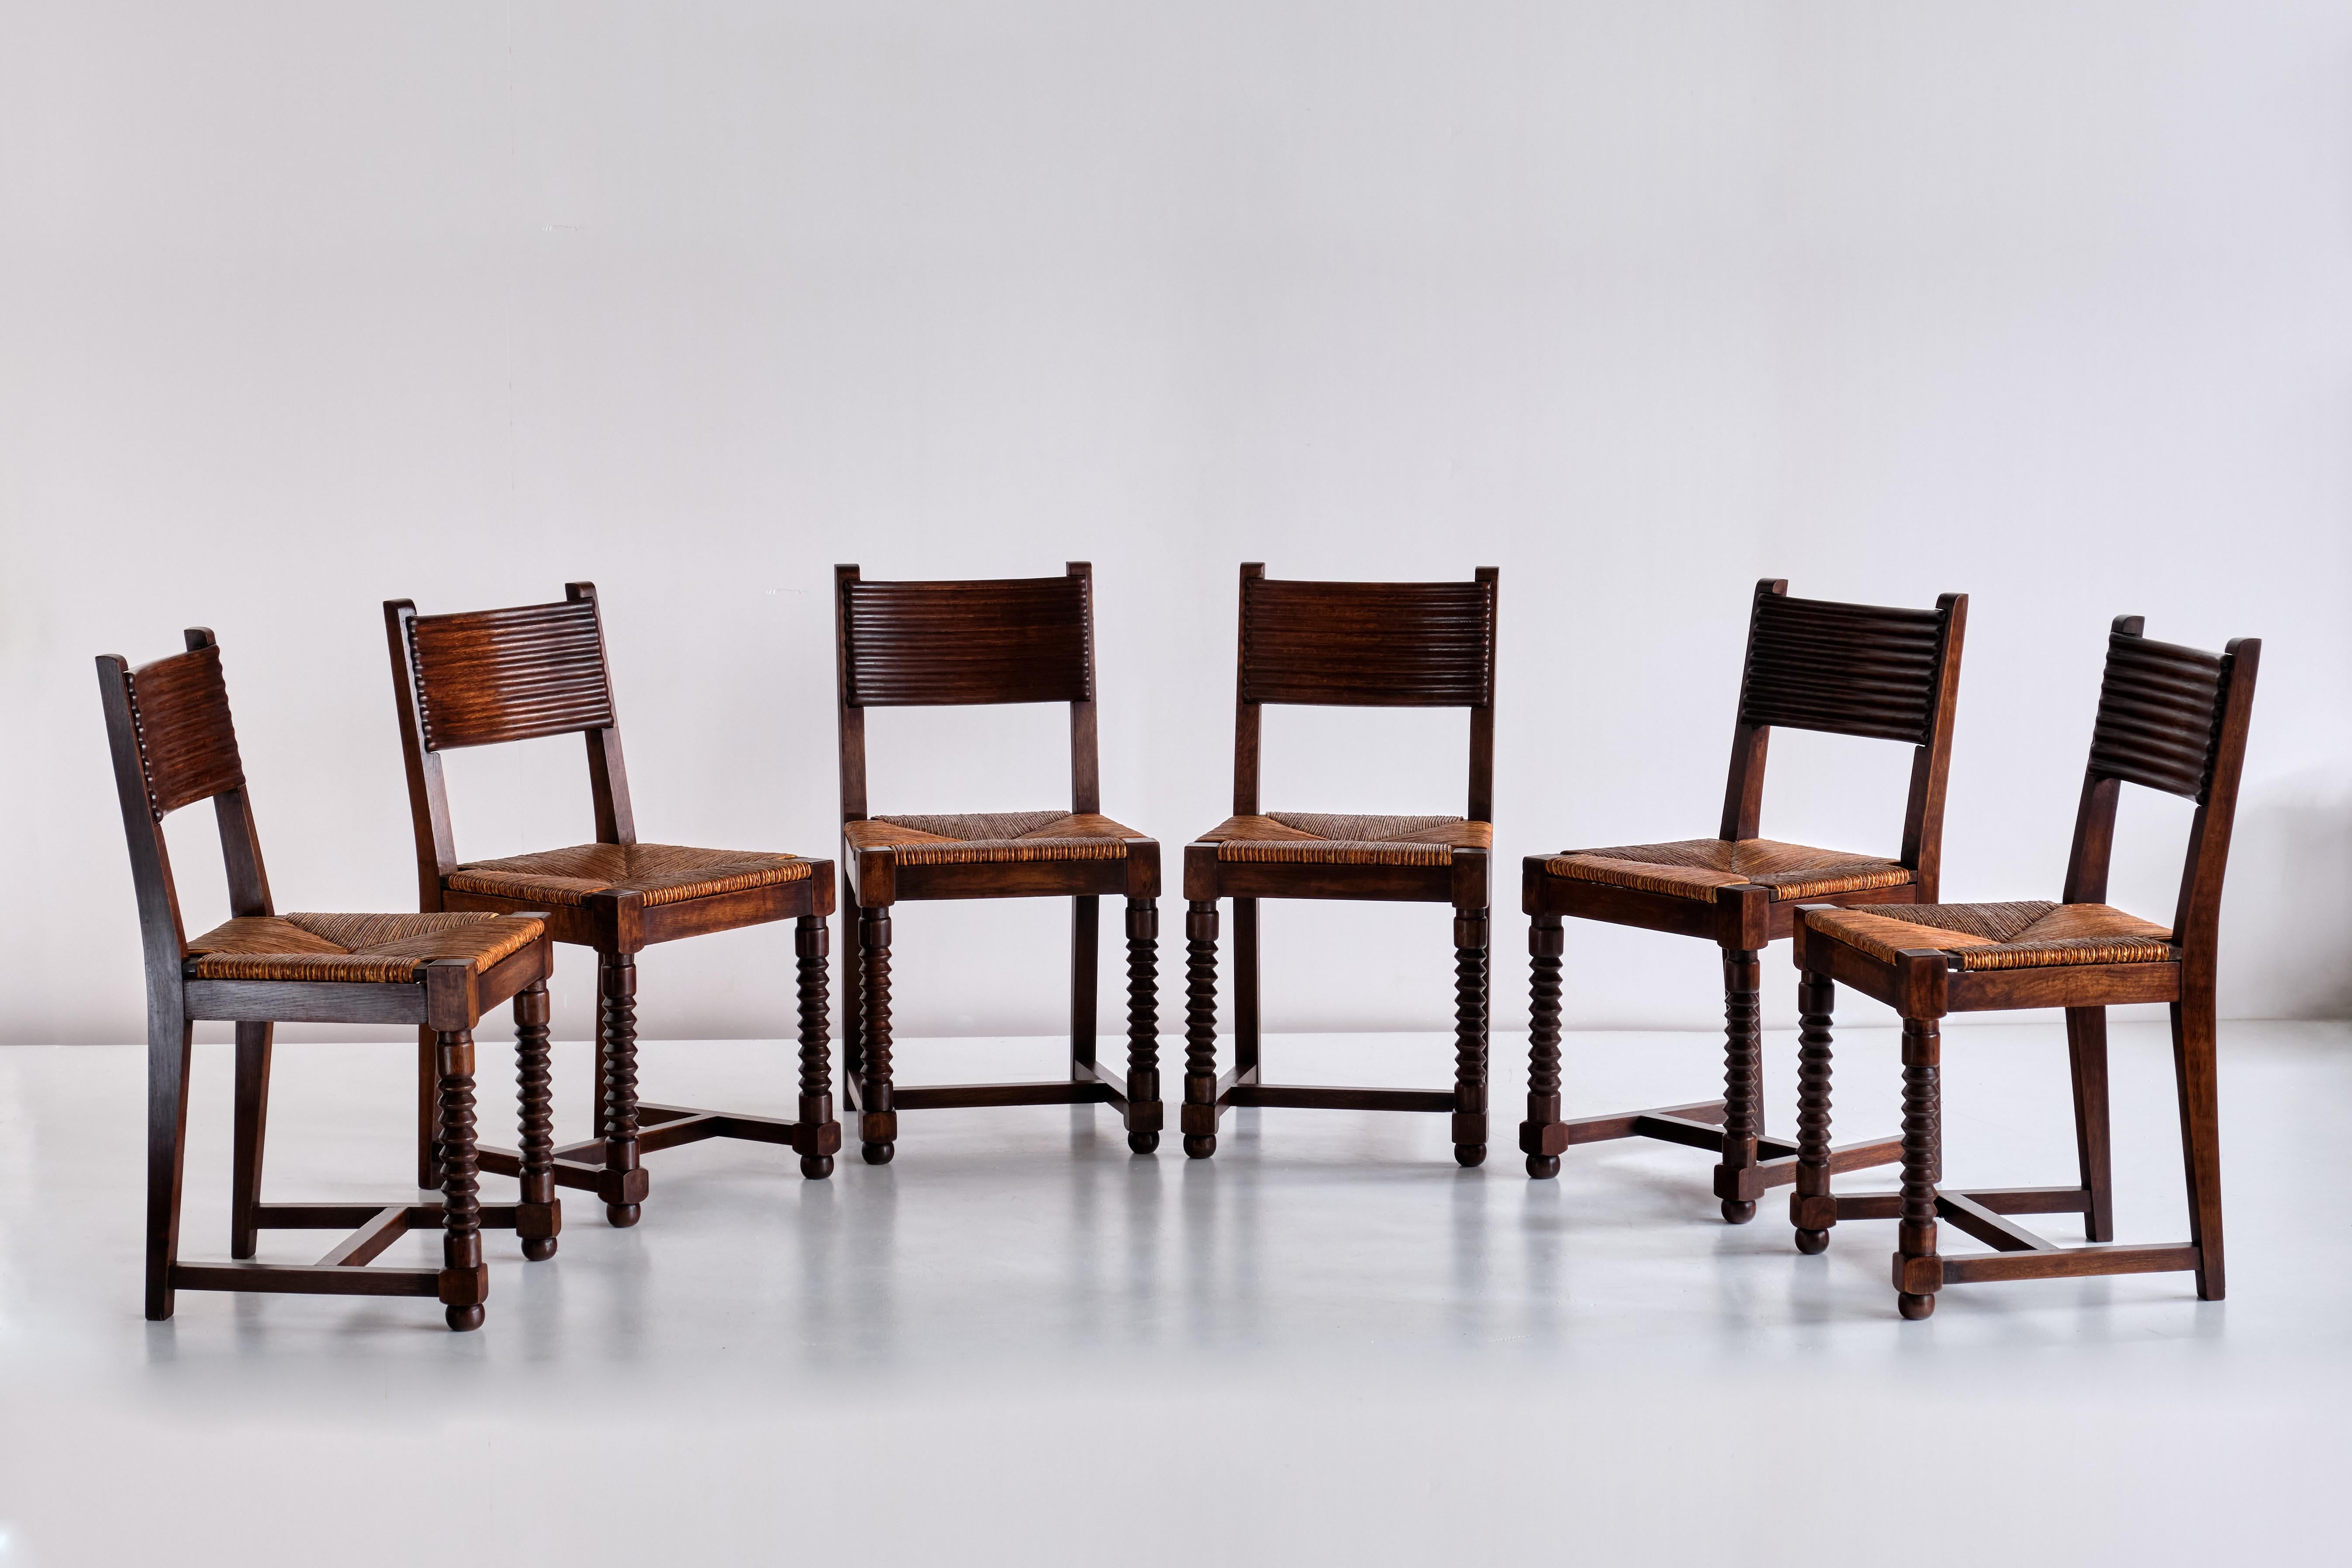 This striking set of six dining chairs was designed by Victor Courtray and produced in the Northern Basque region around the city of Biarritz in the 1940s. 
The chairs are in solid, stained oak with the seat in woven rush. The carved disc shape of